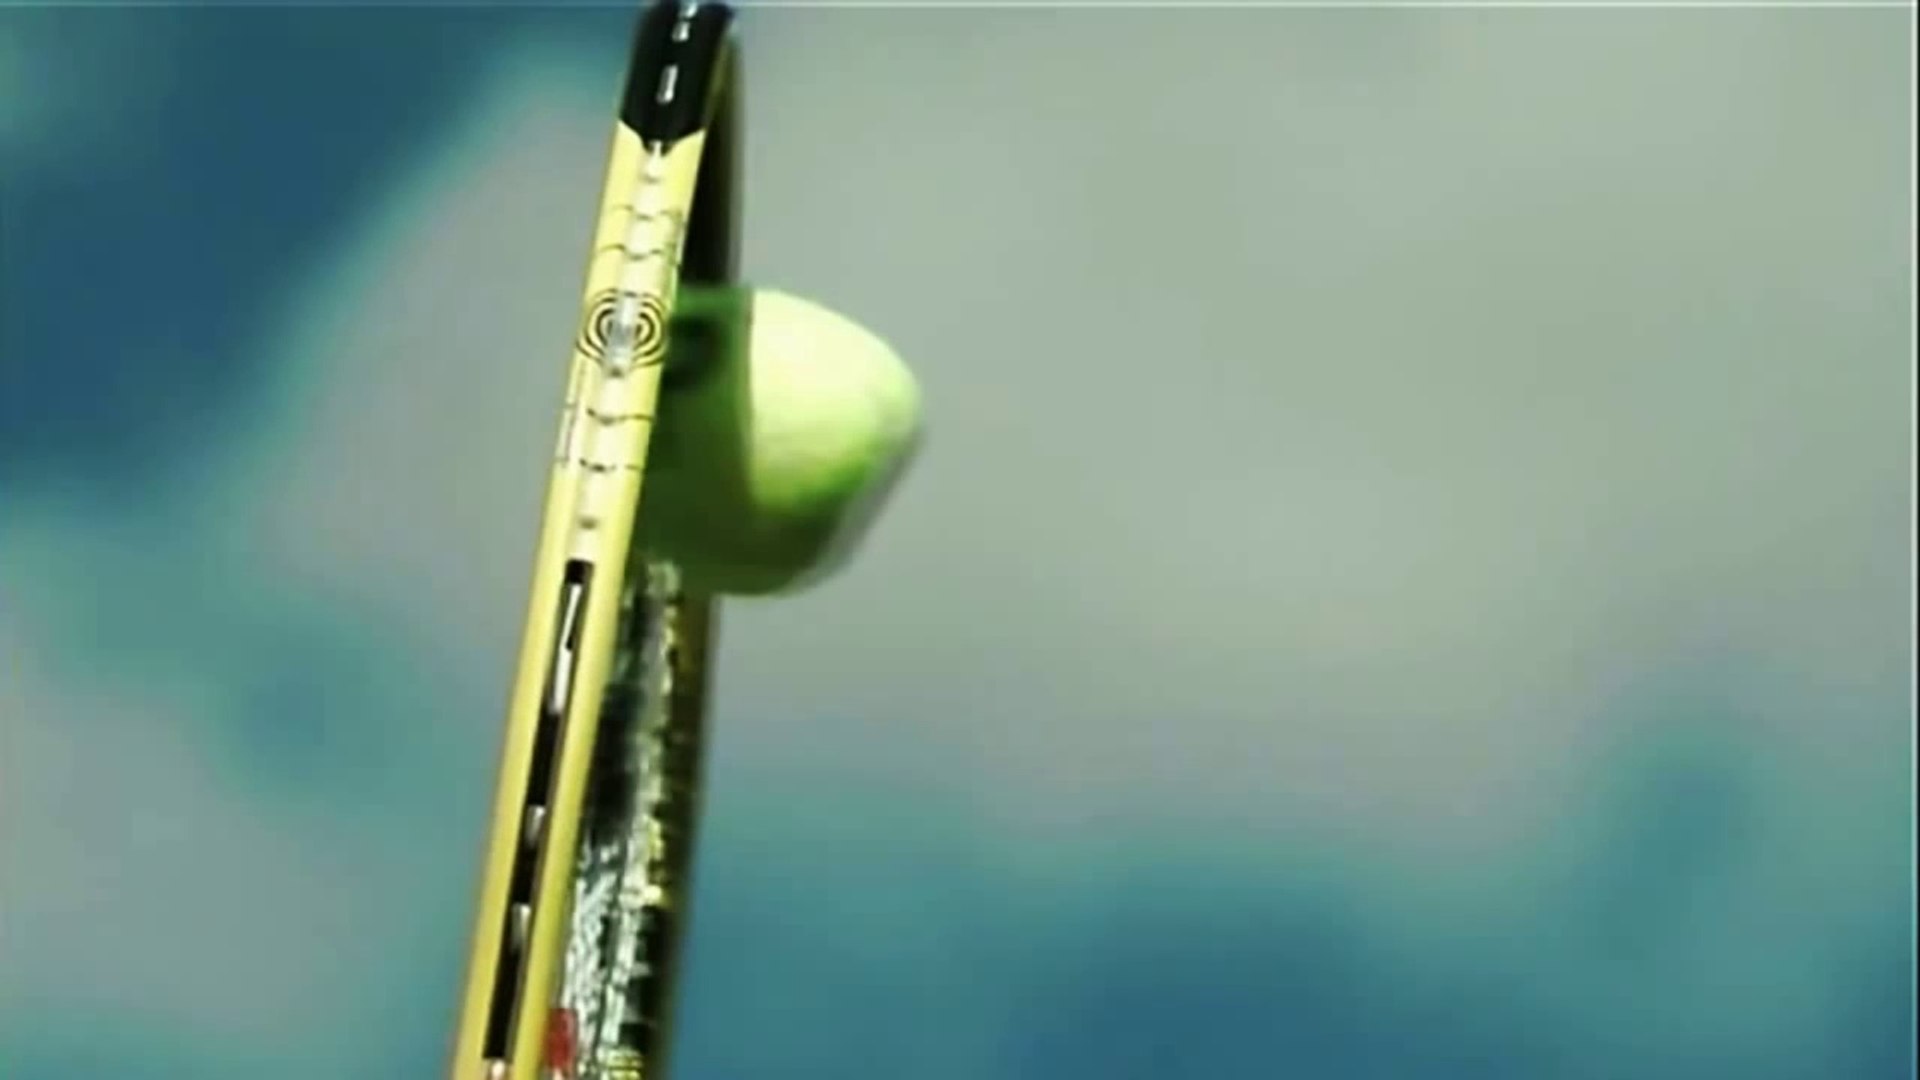 Tennis Ball hit by Racquet during 142mph Serve... Great slow motion - Vidéo  Dailymotion